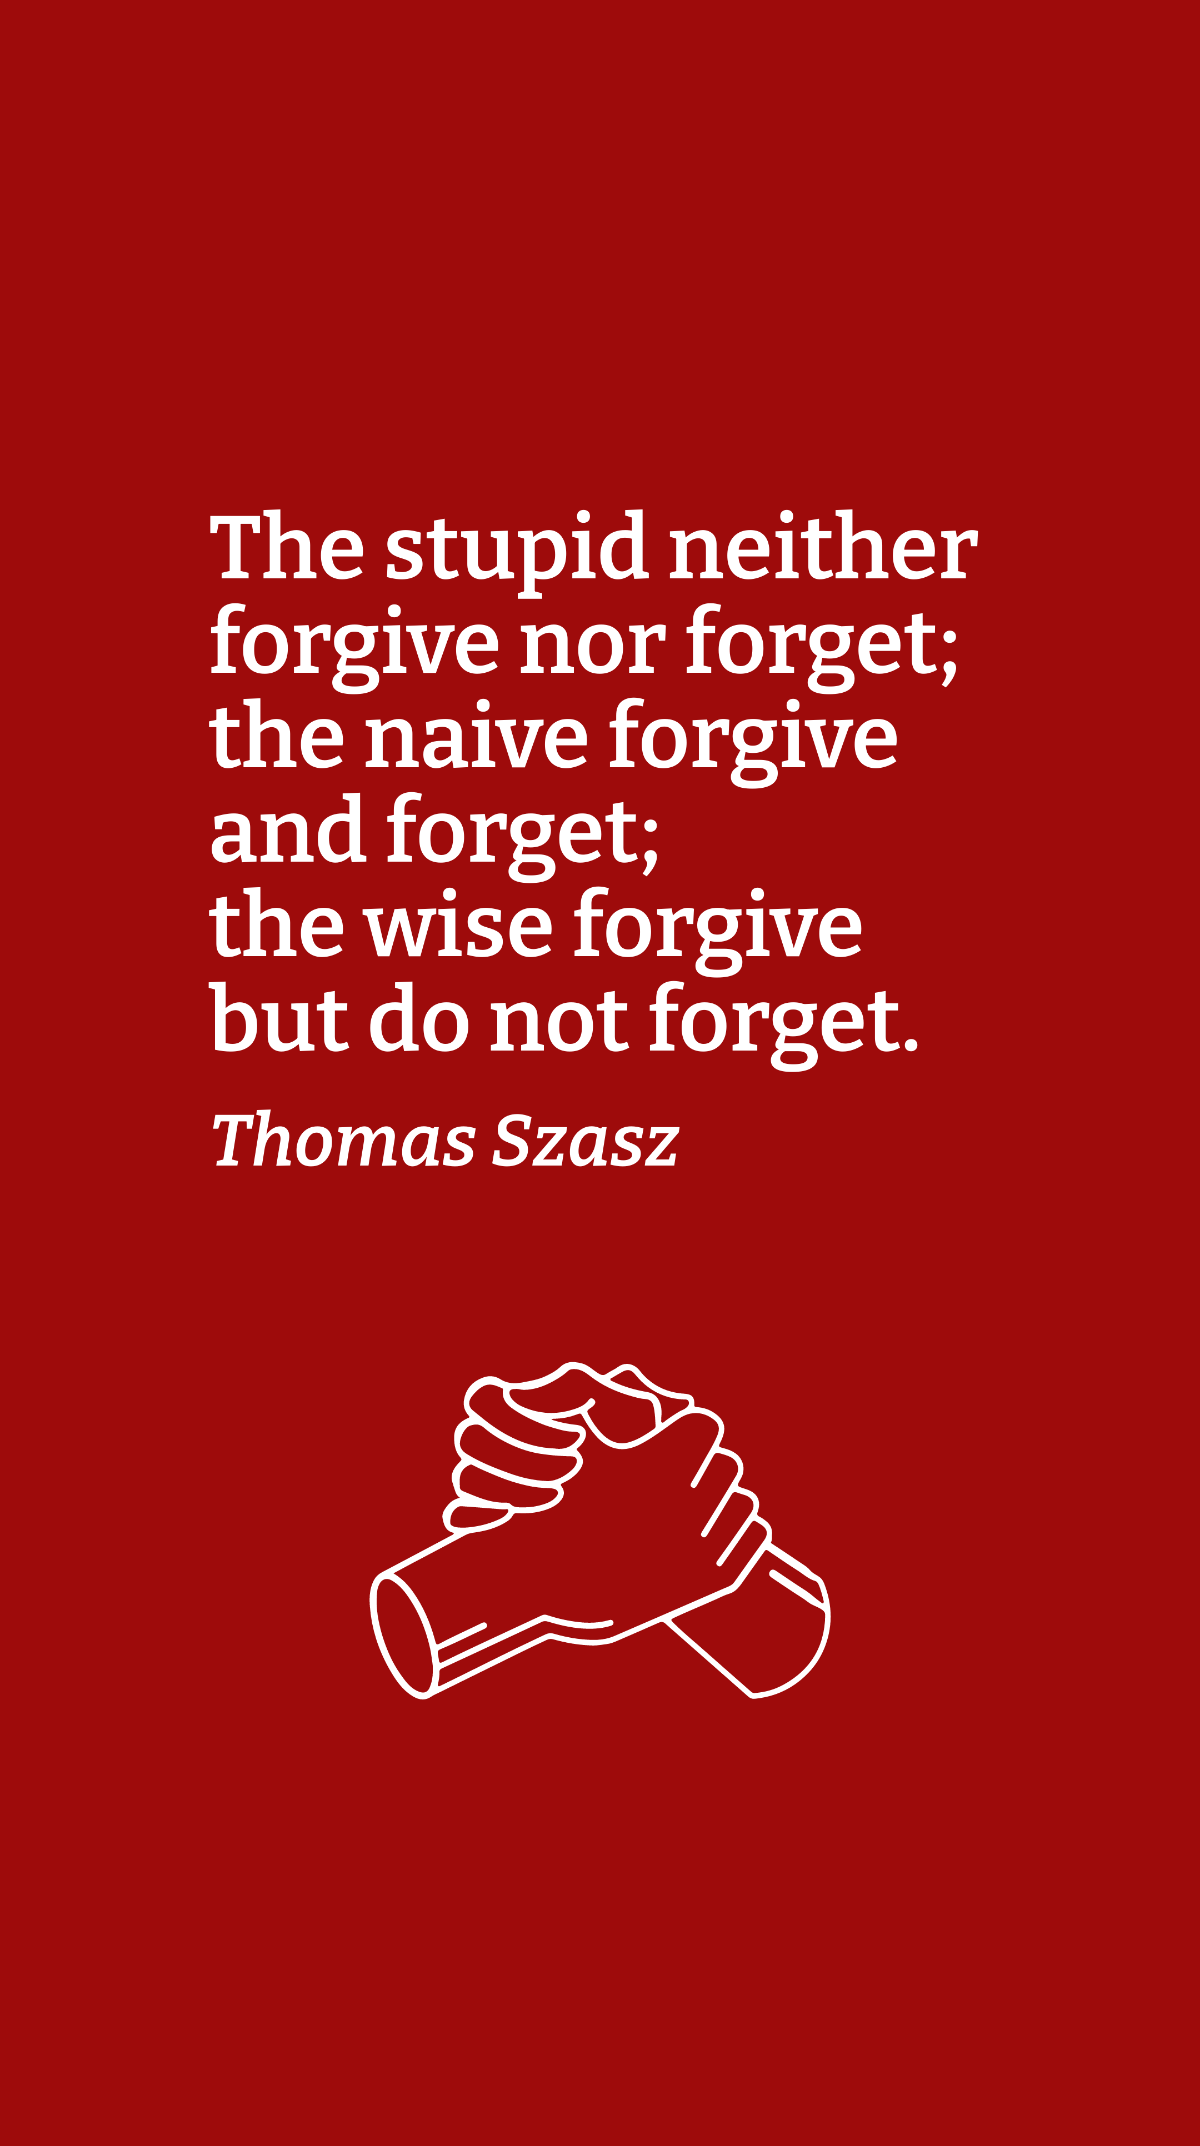 Thomas Szasz - The stupid neither forgive nor forget; the naive forgive and forget; the wise forgive but do not forget. Template